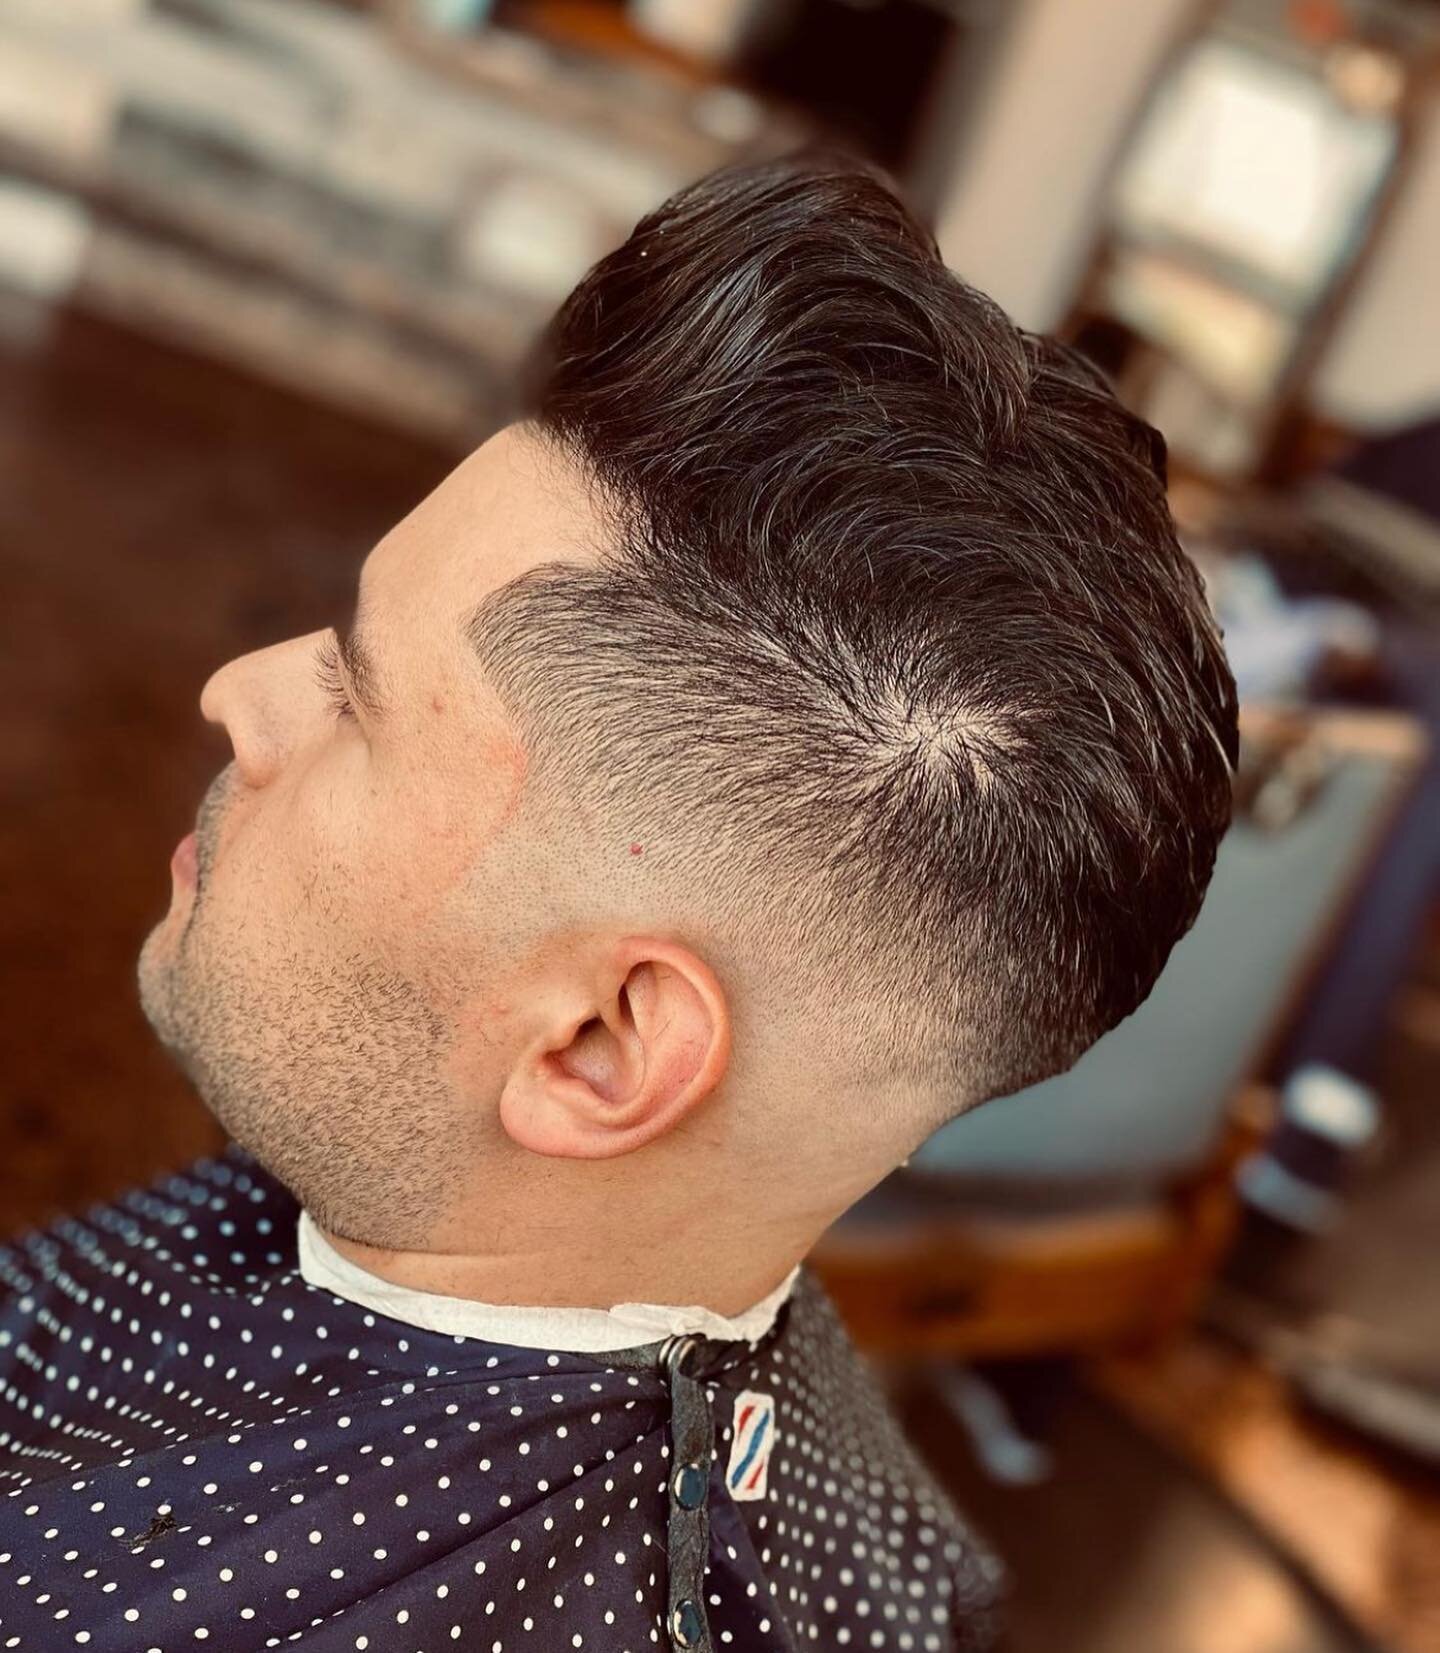 Fresh cuts on this Sunday morning☀️ Please book accordingly as we have limited spots available. Service by @danielsakilayan 

#freshcuts #sundayvibes #menstyle #faded #pompadour #cleancuts #barberlife #barbershop #service #cali #vibes